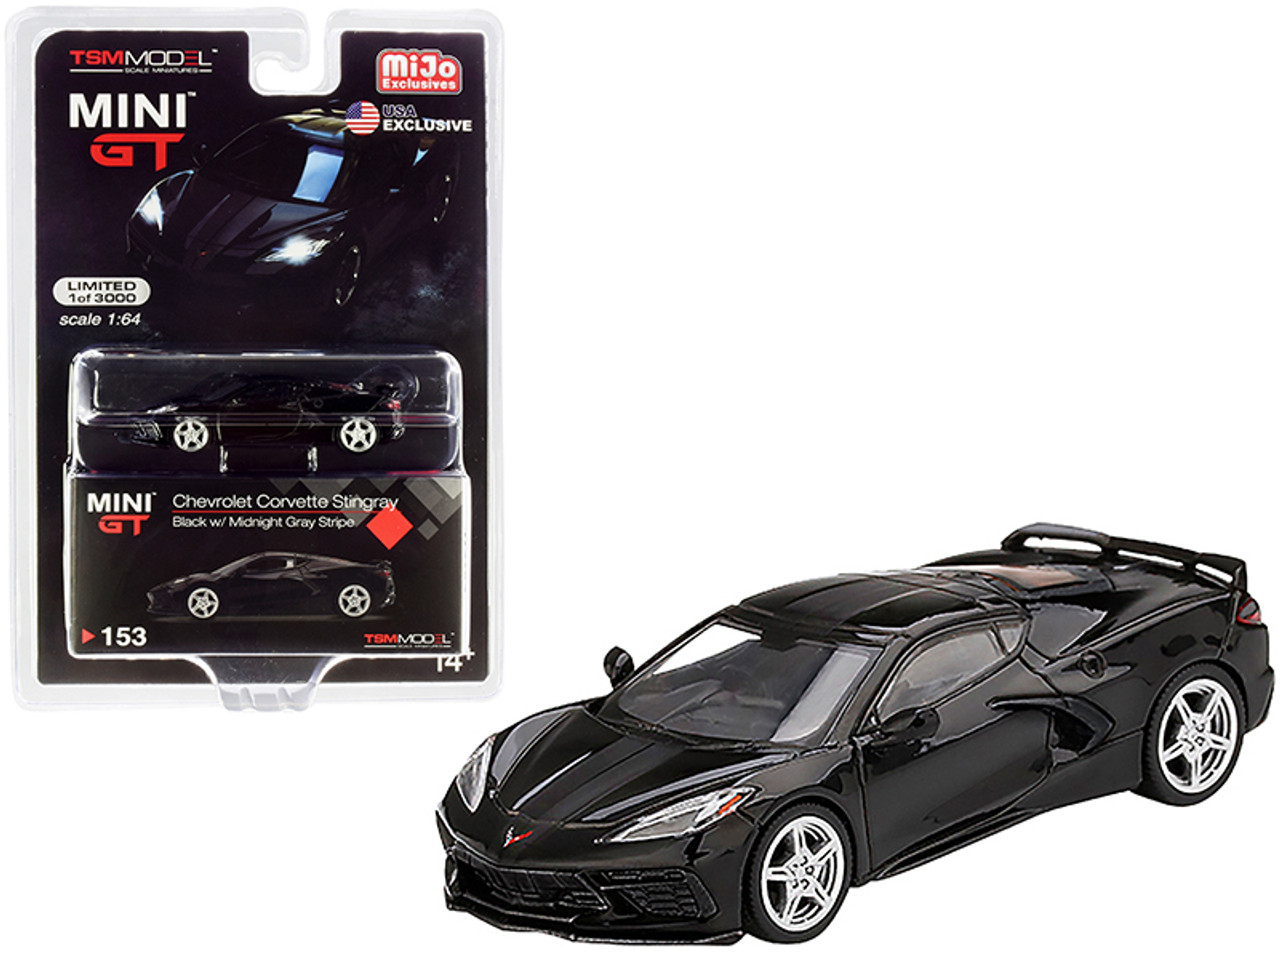 2020 Chevrolet Corvette Stingray C8 Black with Midnight Gray Stripe Limited Edition to 3000 pieces Worldwide 1/64 Diecast Model Car by True Scale Miniatures